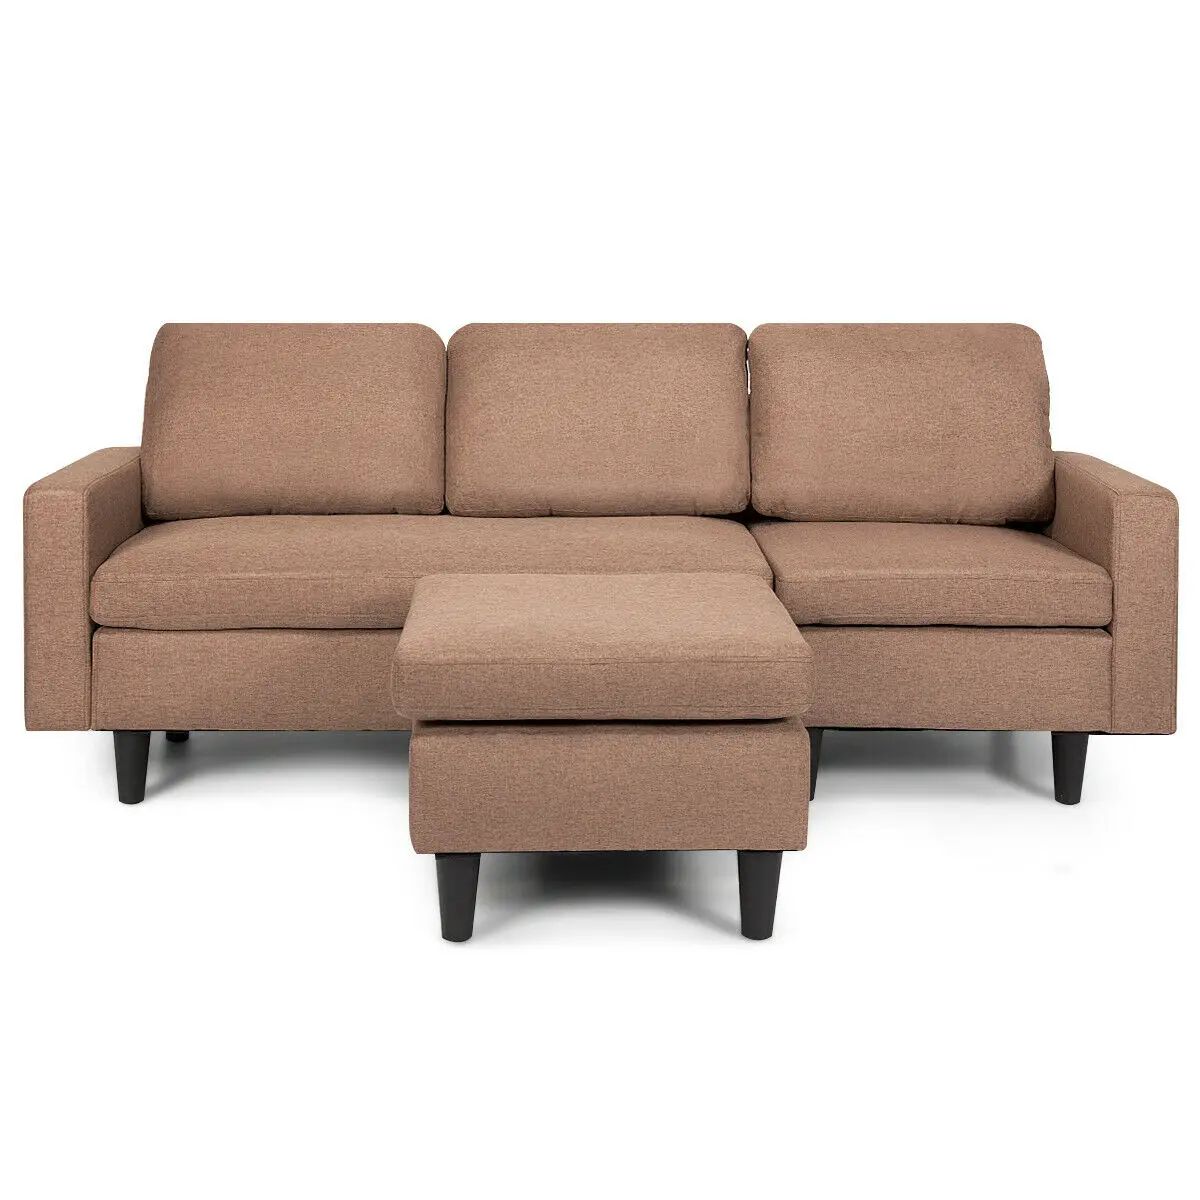 Convertible Sectional L Shaped Sofa Couch Pertaining To Convertible L Shaped Sectional Sofas (View 17 of 20)